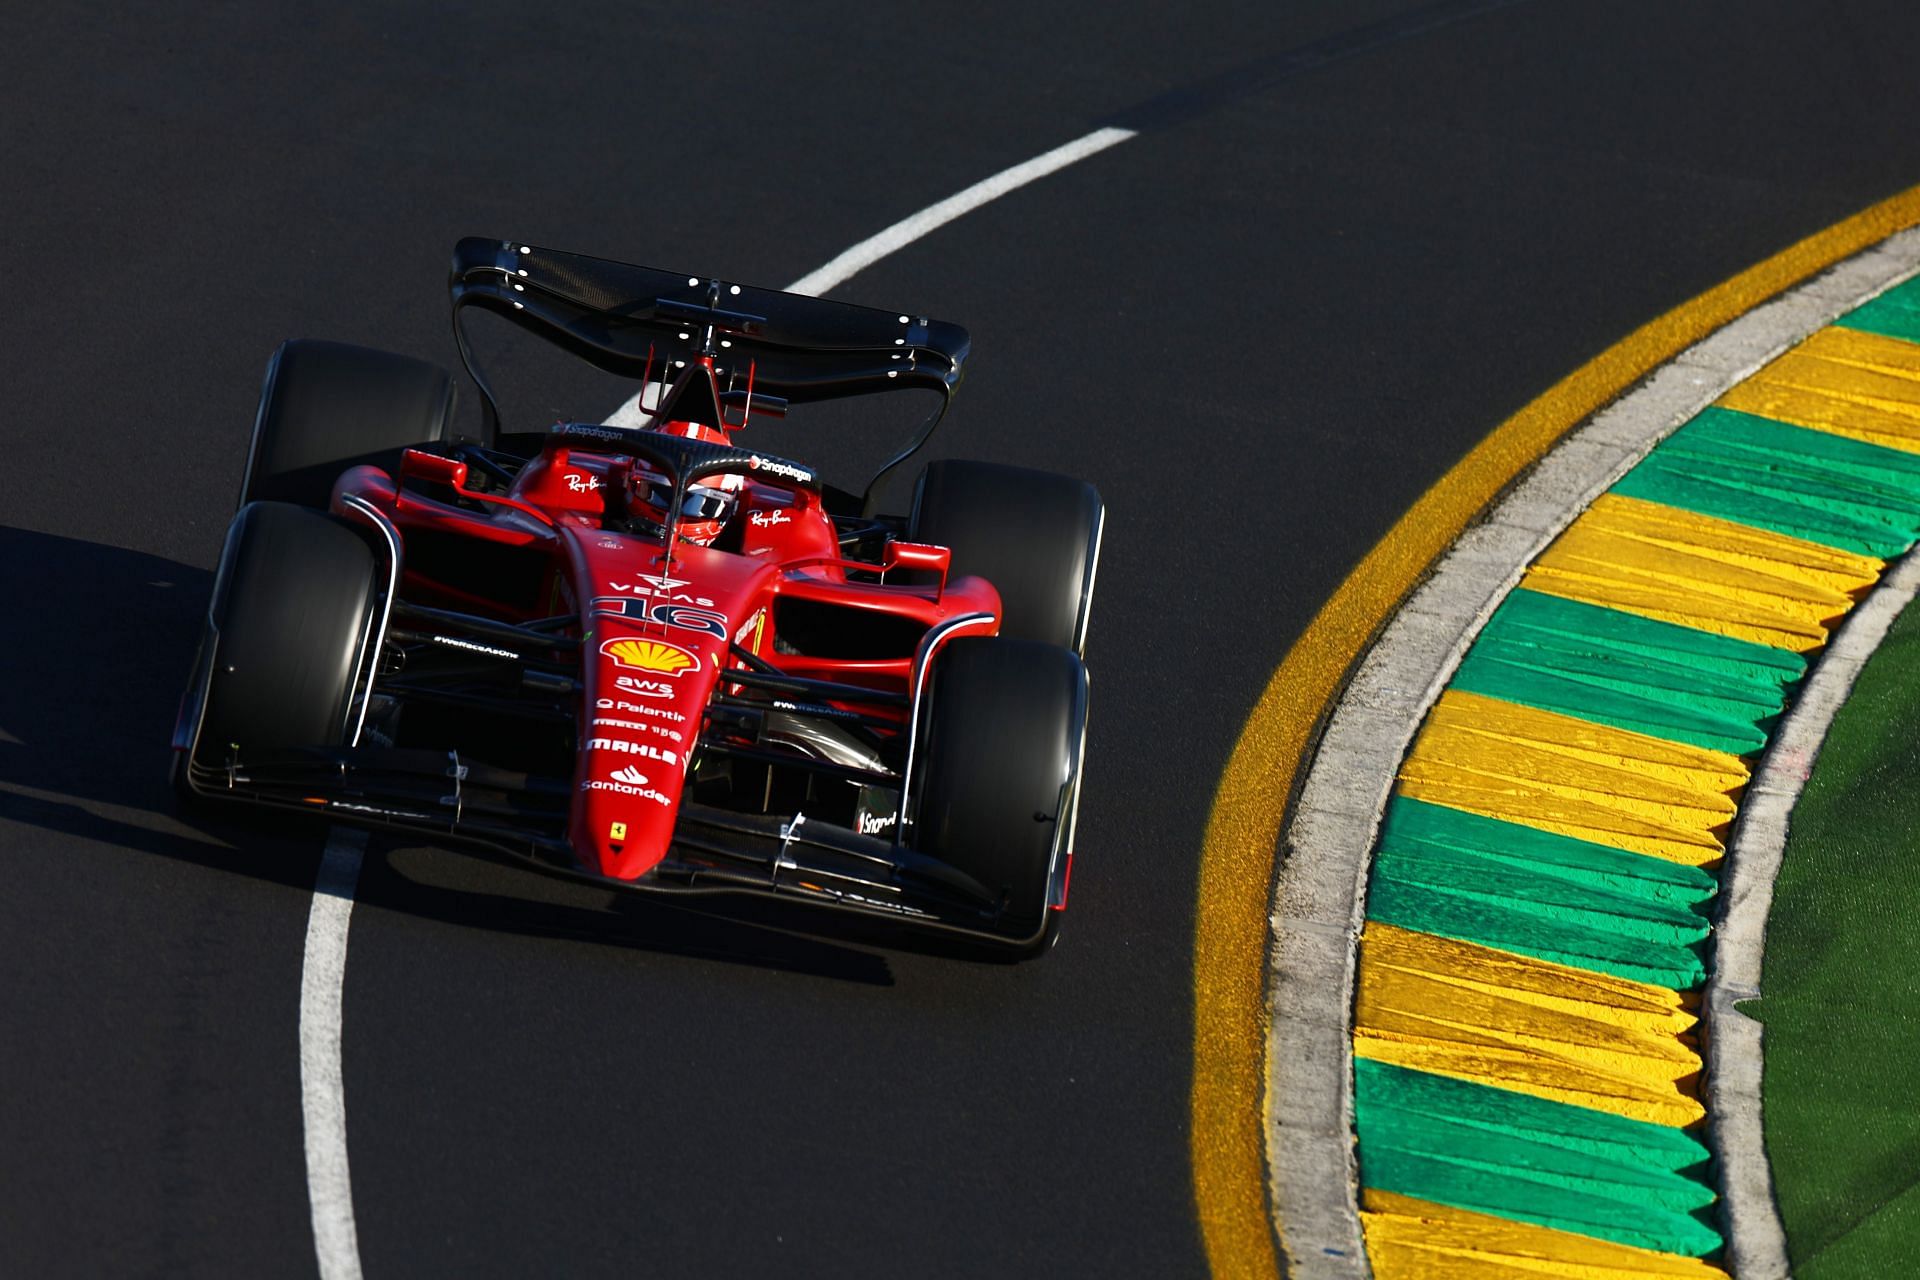 Ferrari will be leaving Australia with a smile on its face